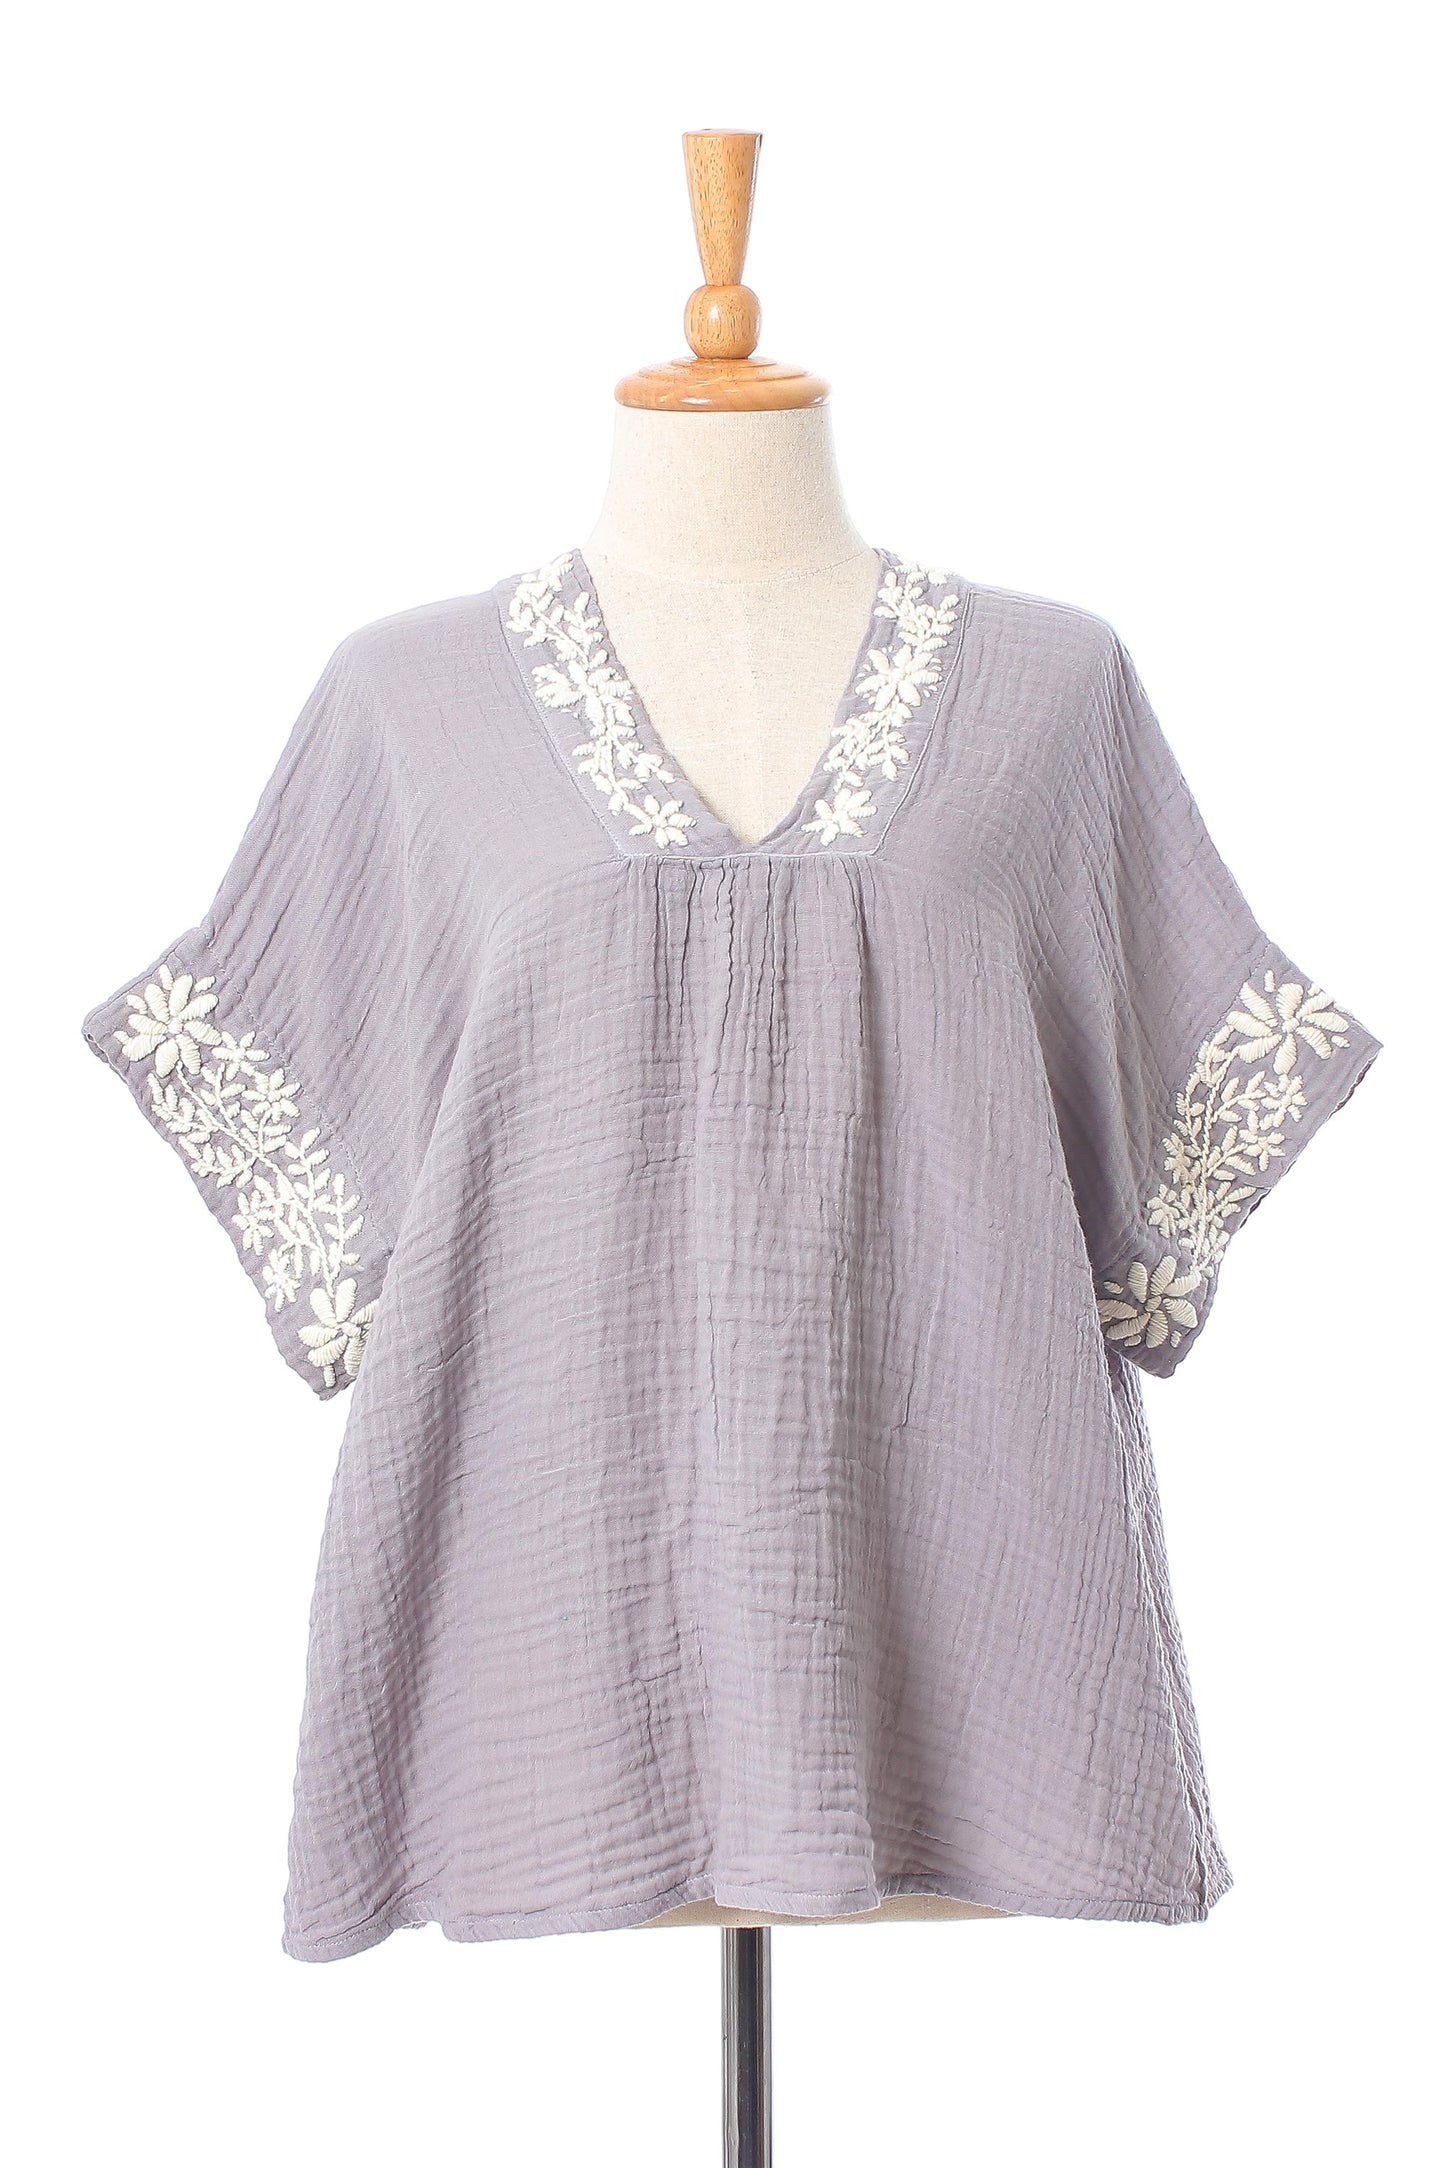 Classic Bloom in Ash Floral Embroidered Cotton Blouse in Ash from Thailand